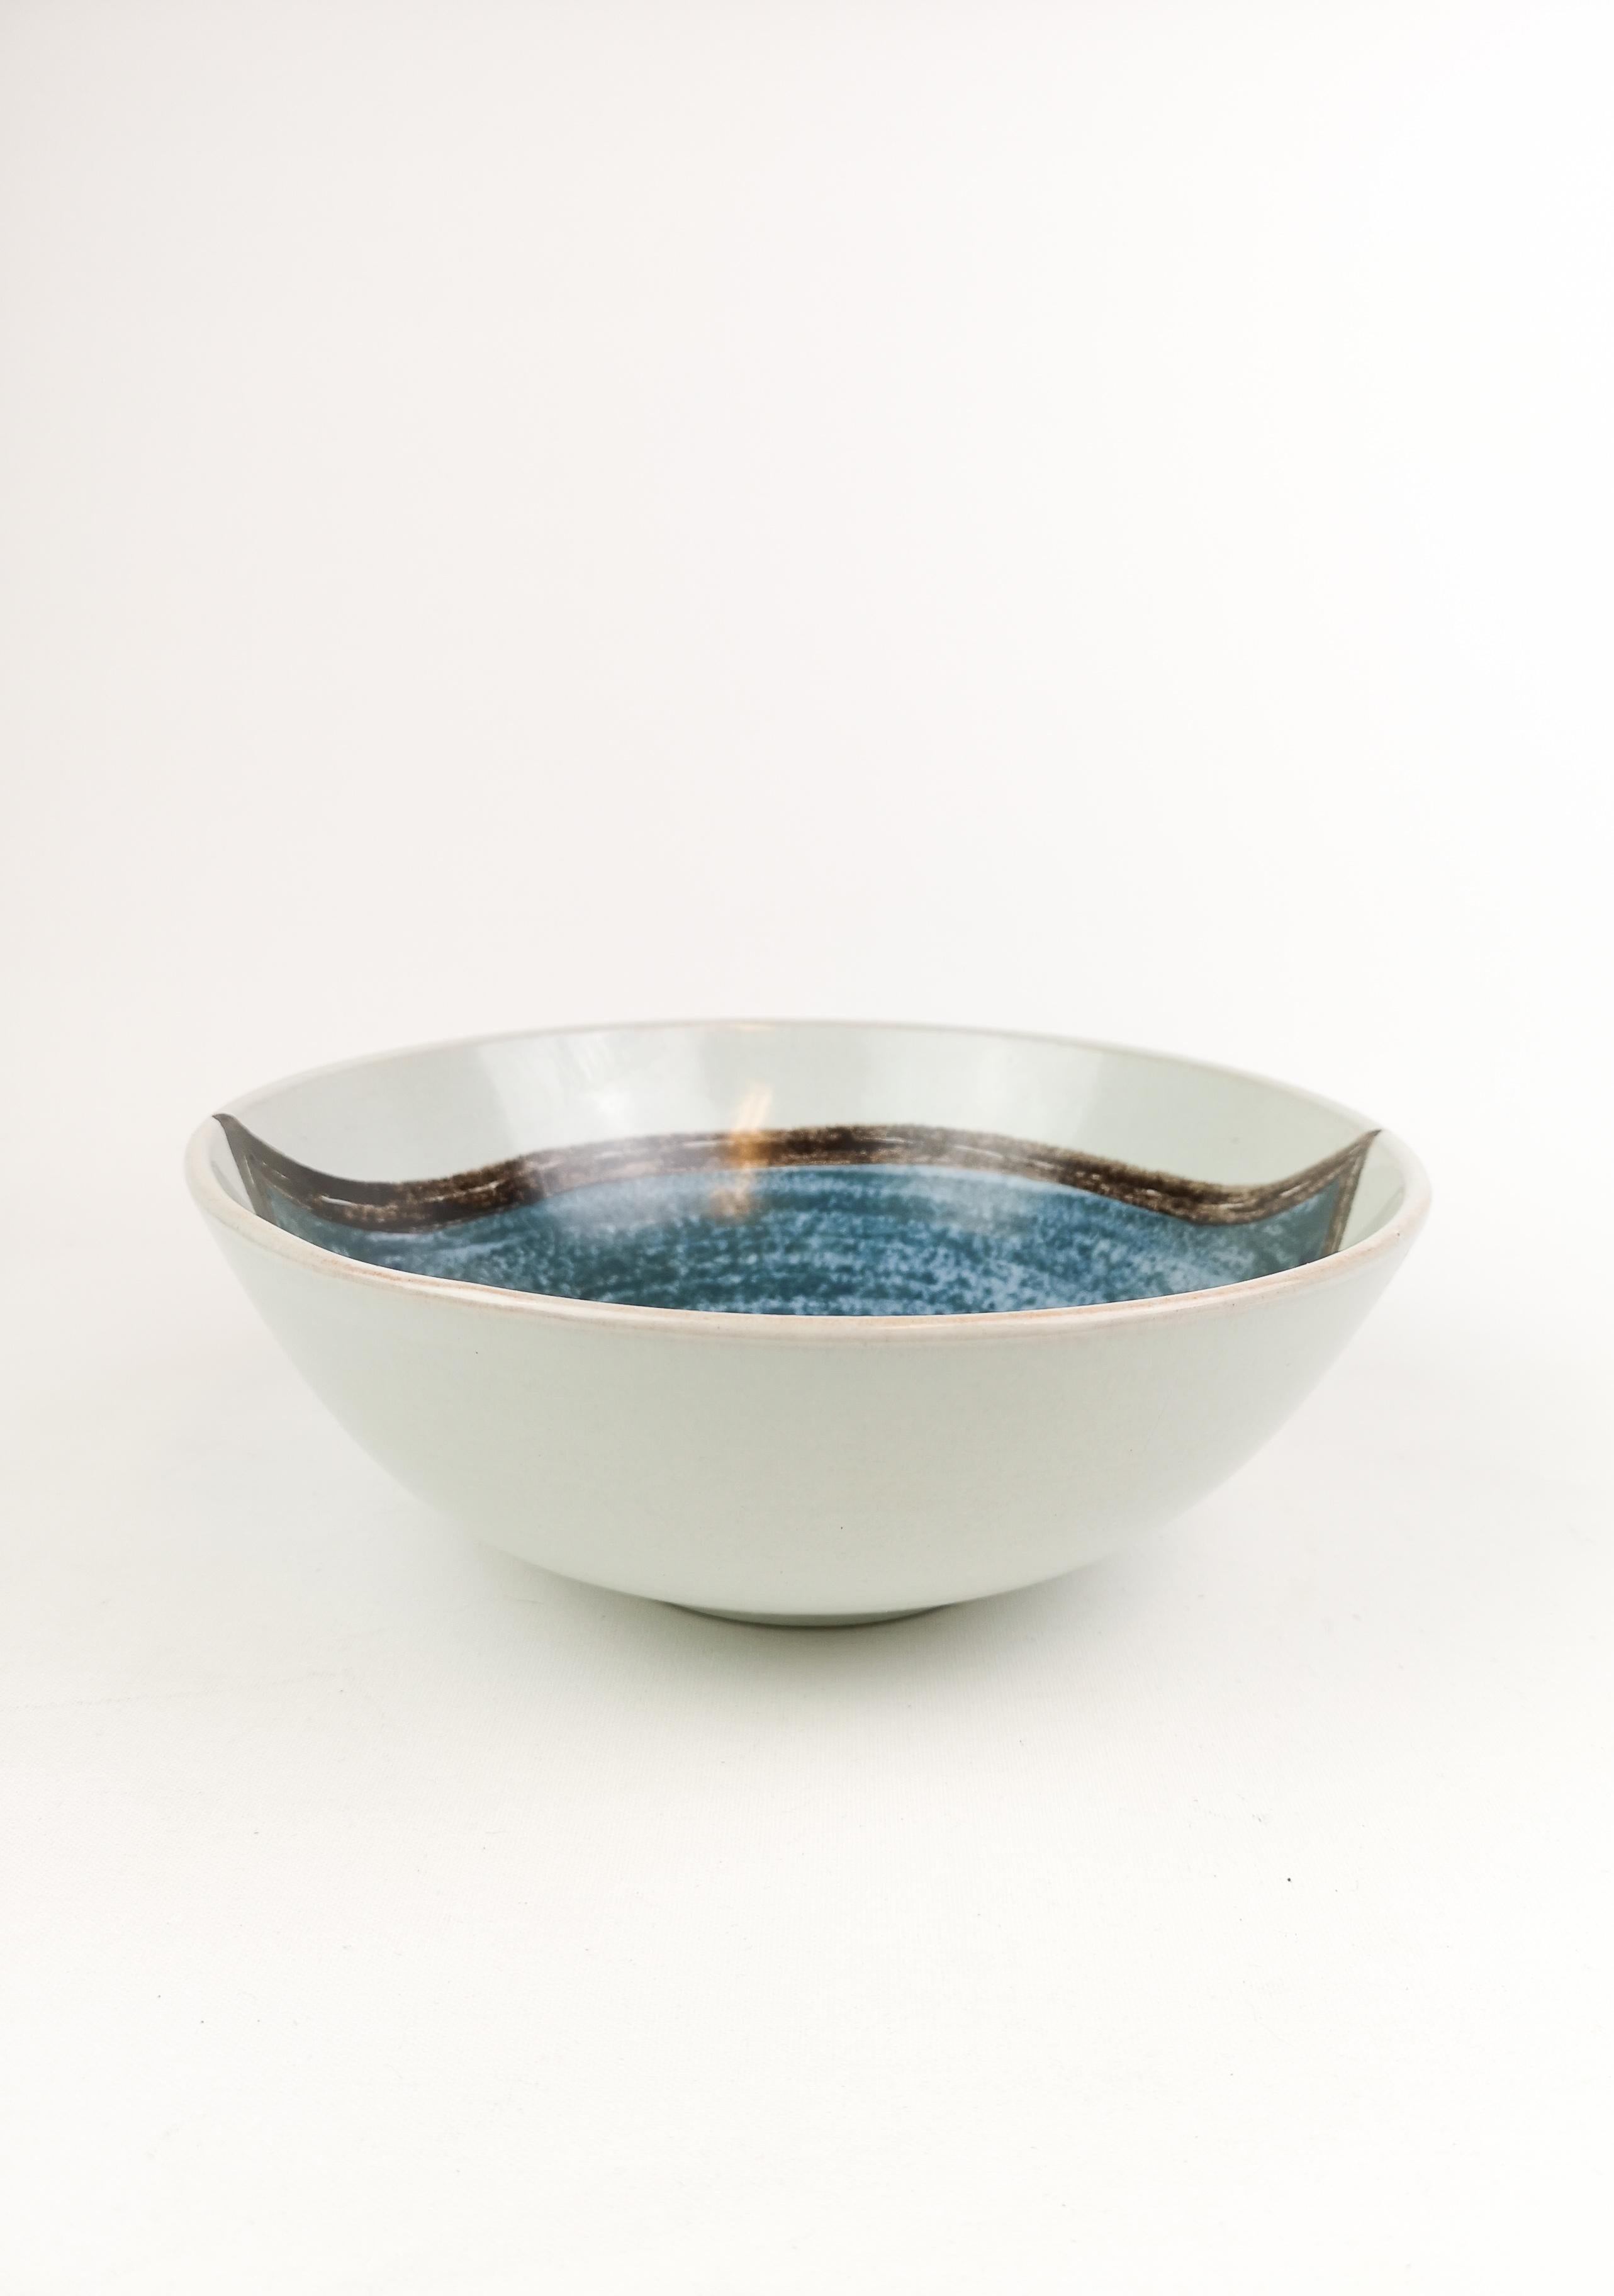 This bowl is a collaboration between Stålhane and Laukkanen. The bowl itself is unique and its form and patterns is incredibly good. 

Very nice condition.

Measures. 24 cm D, 9 cm H.
 